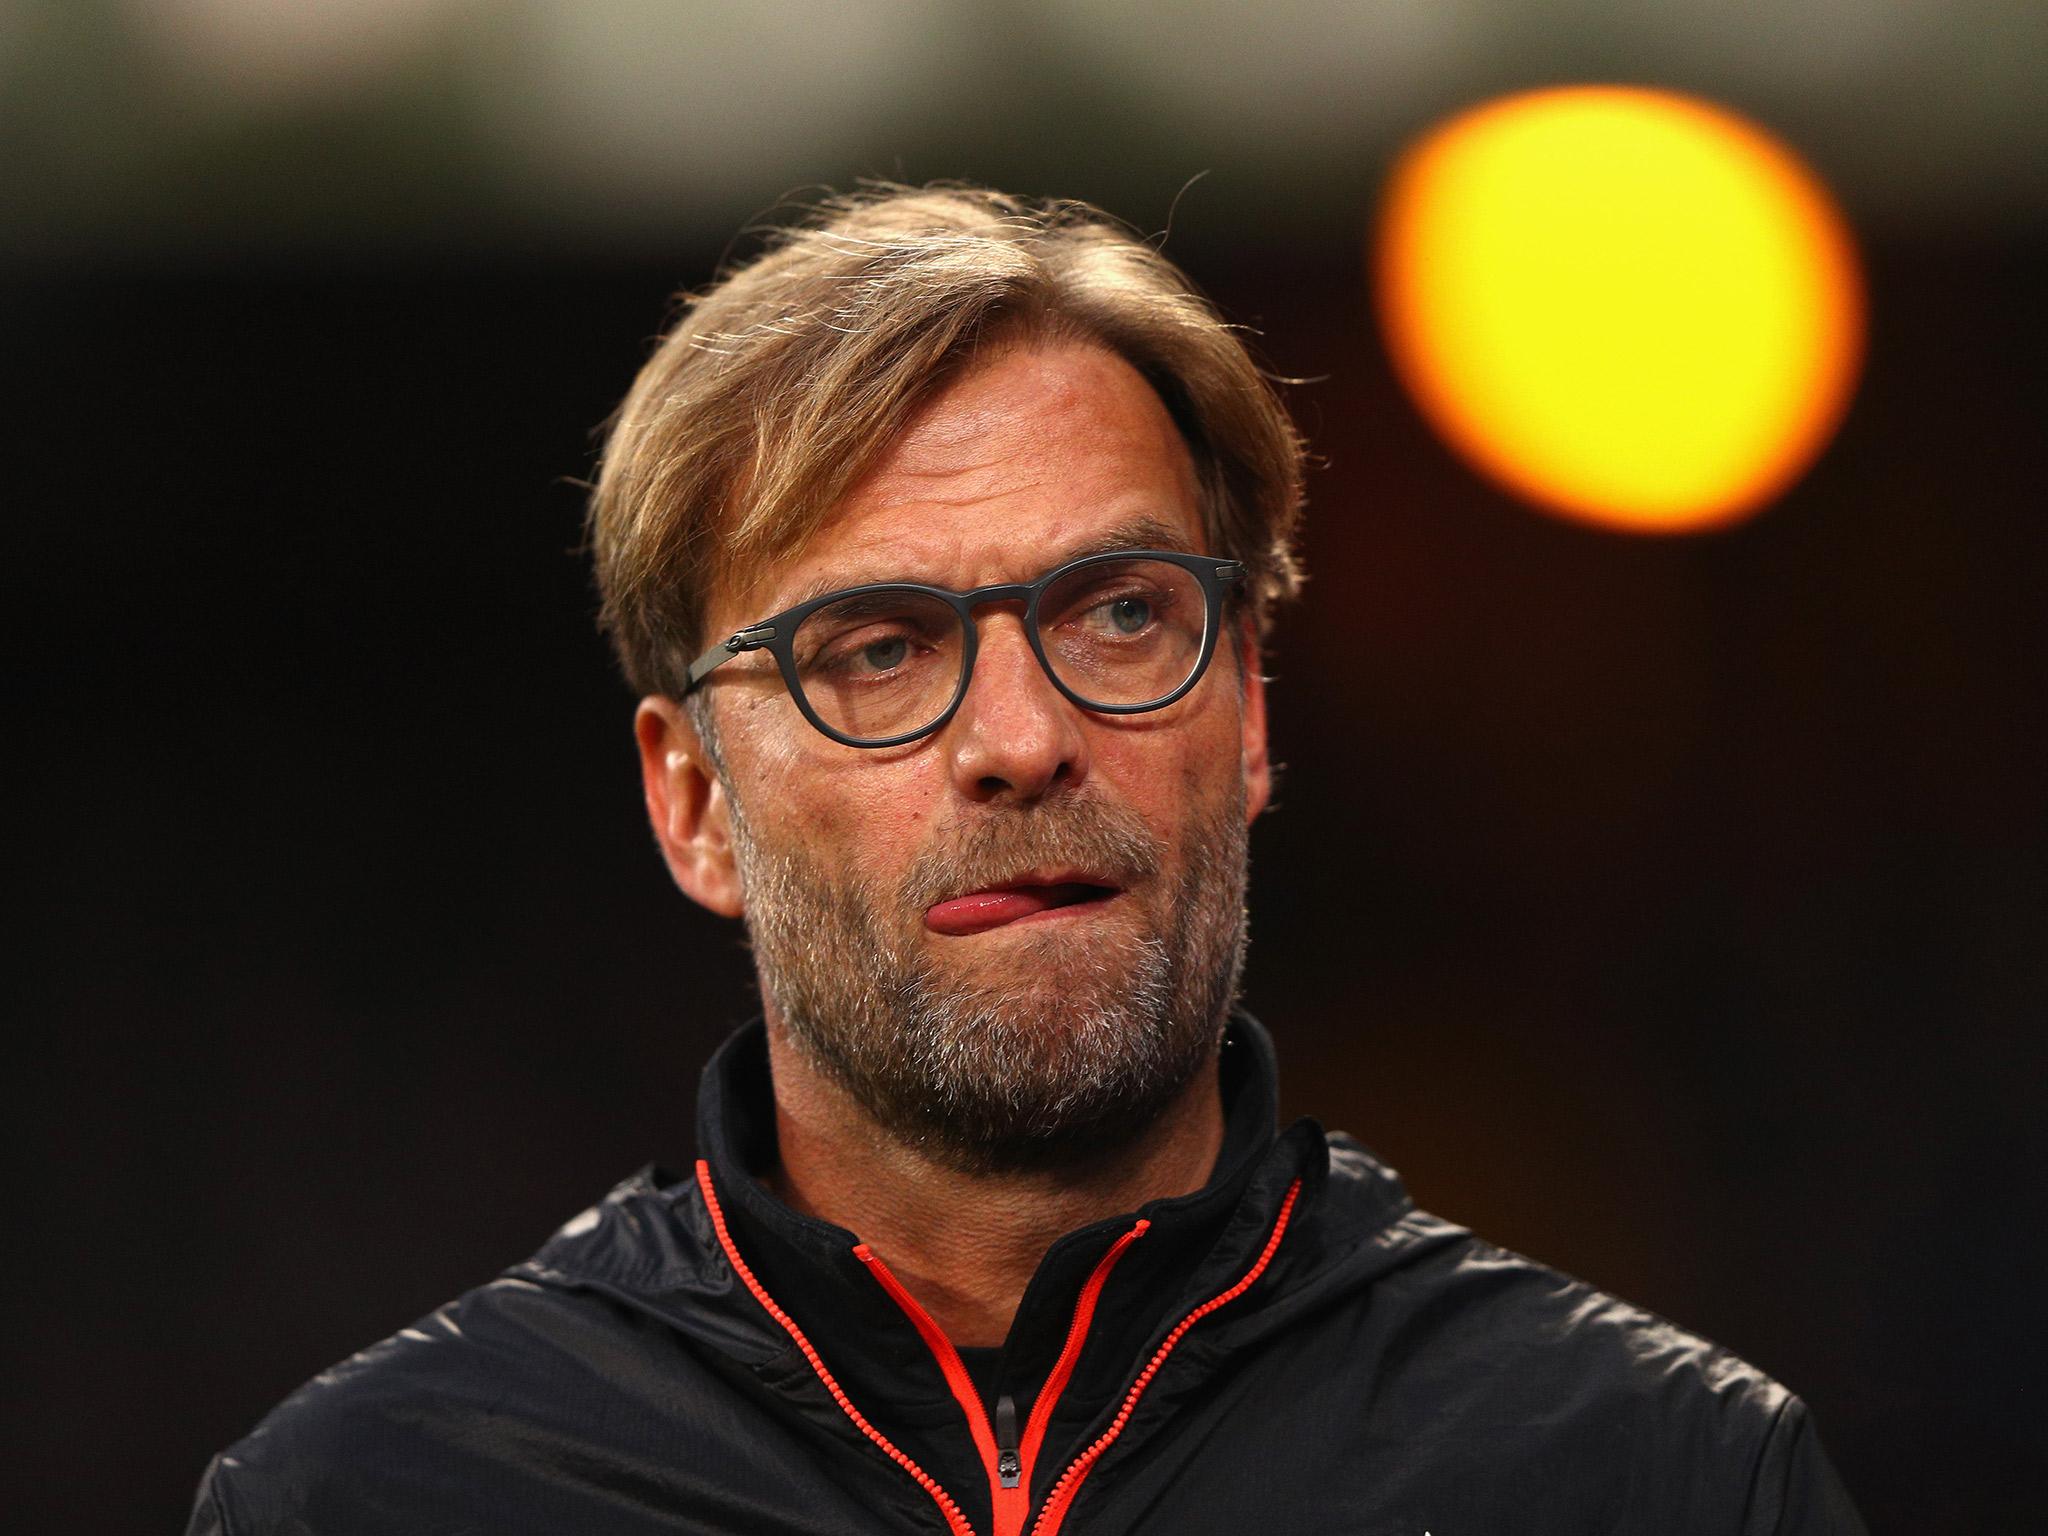 Klopp has said his team will bounce back from defeat at St Mary's